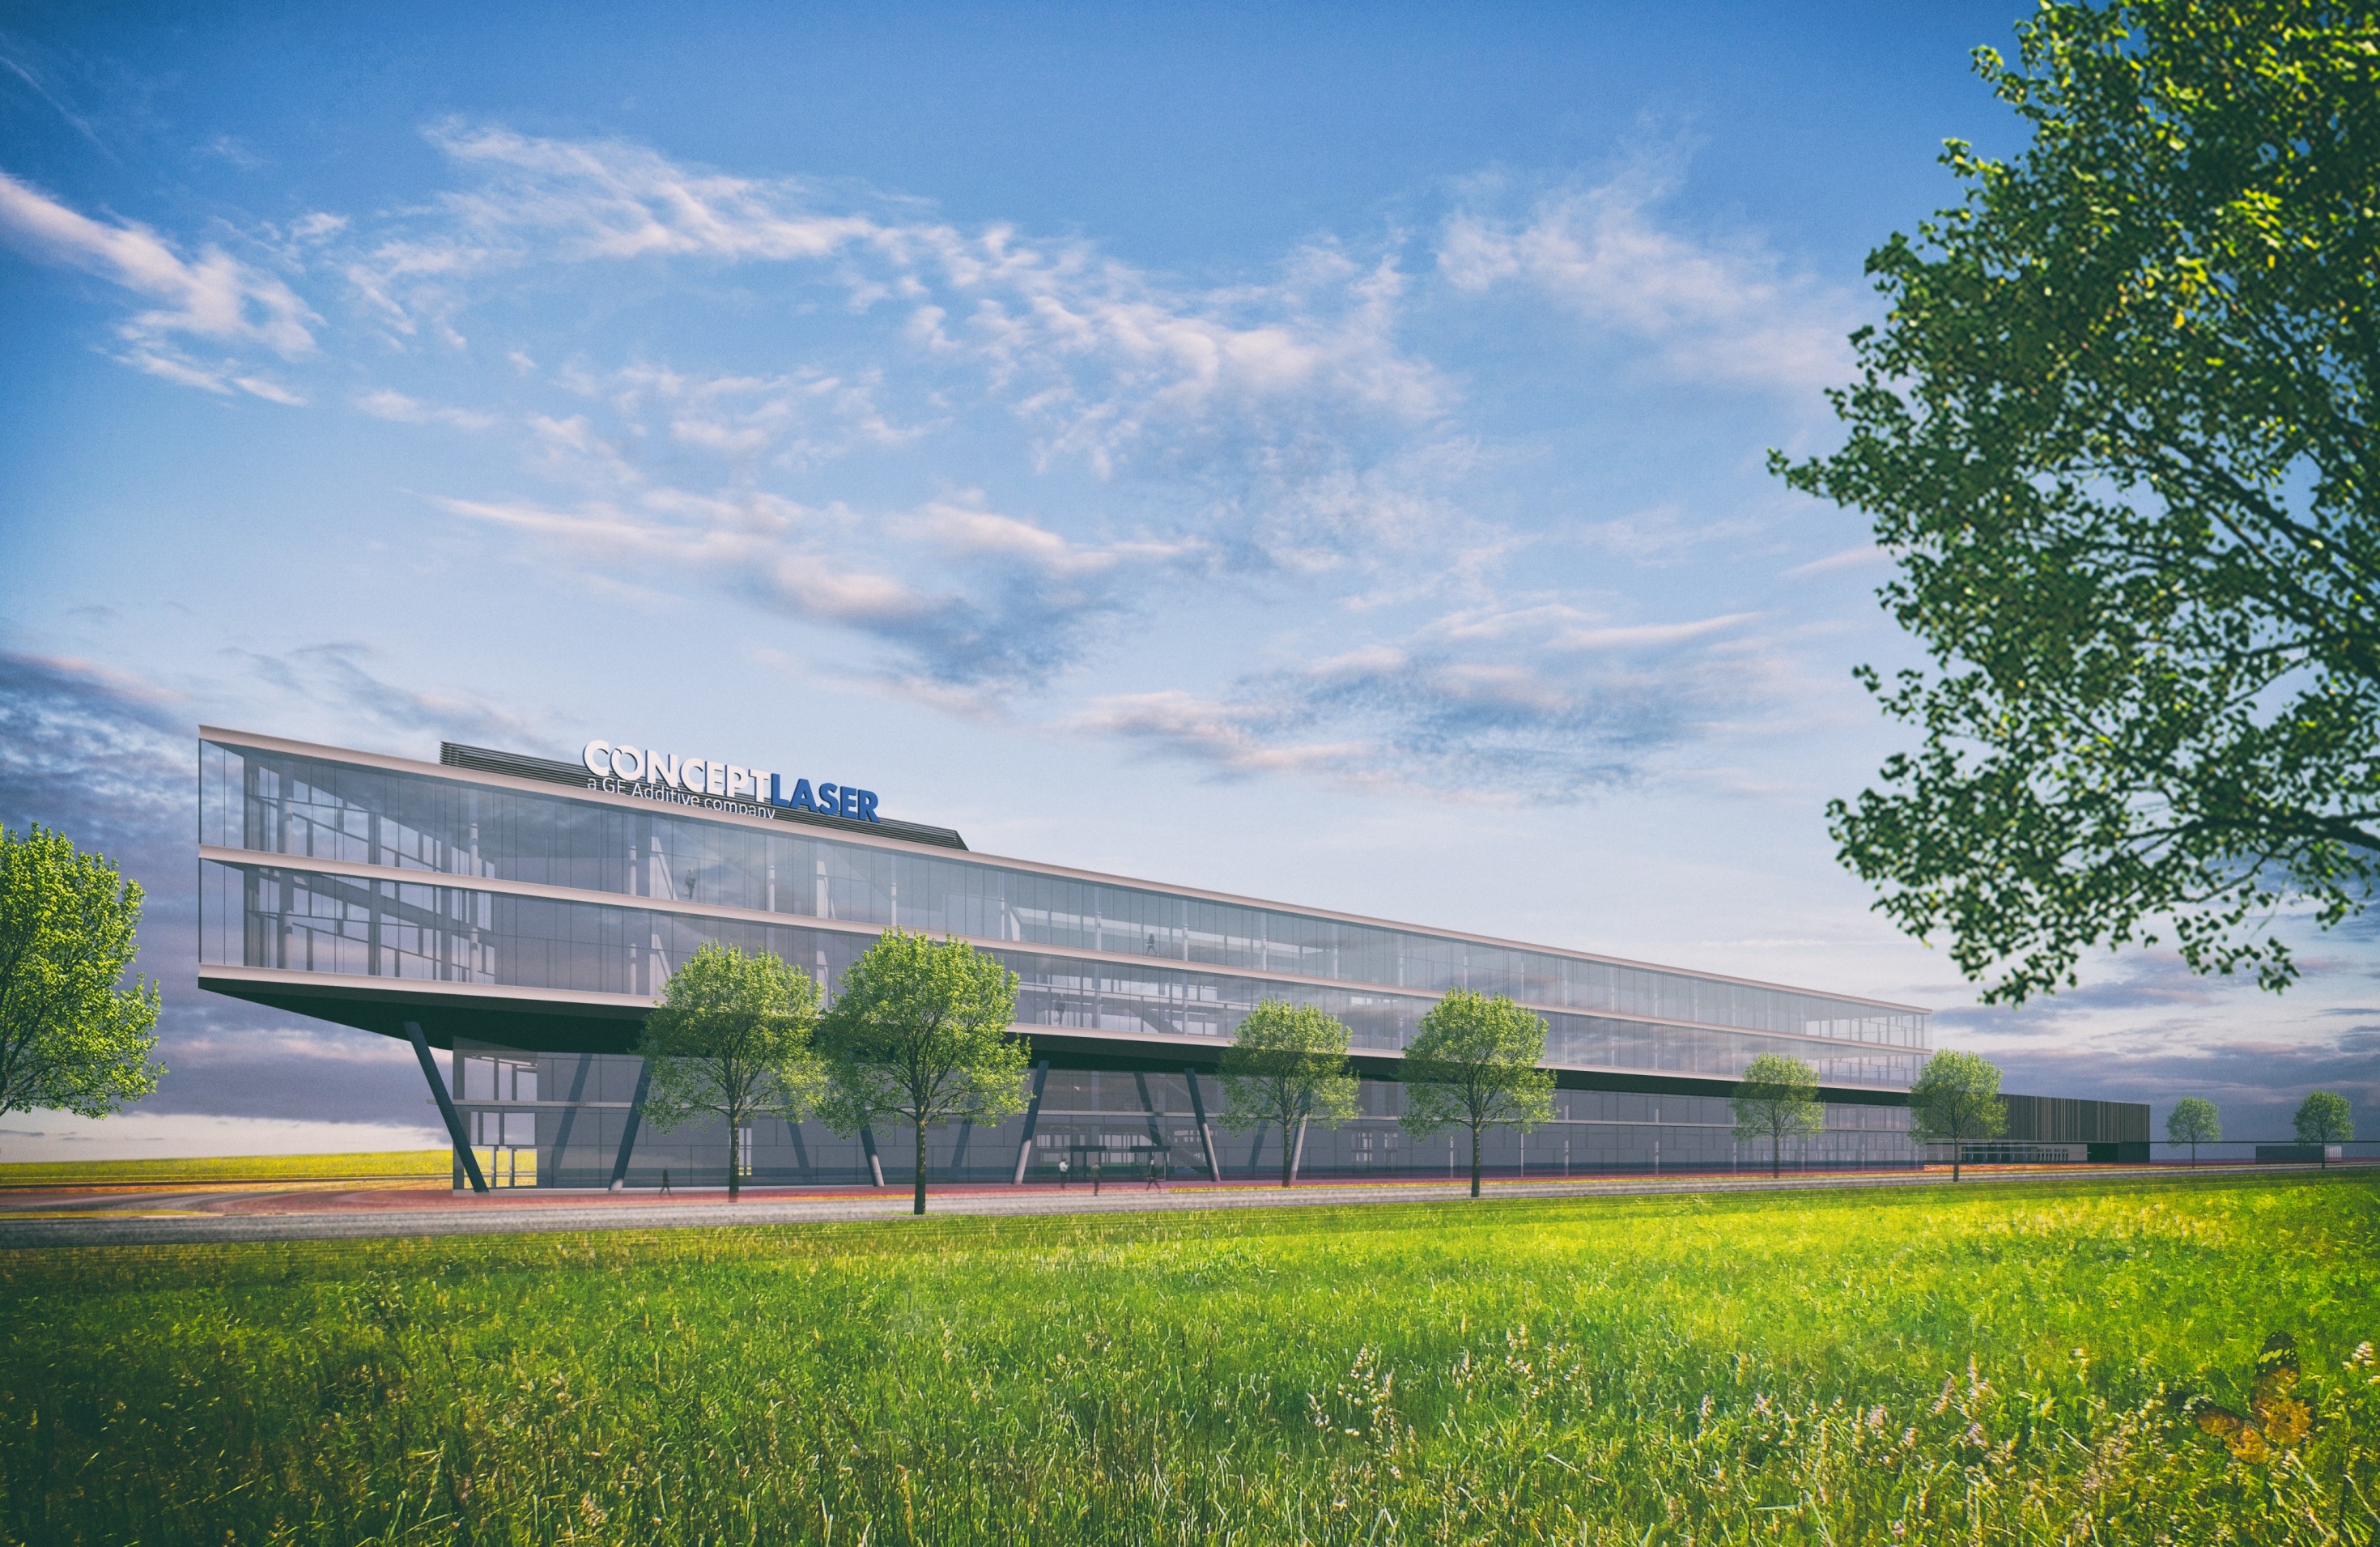 The €105 million facility will be opened in 2019 and will house around 500 employees in 40,000 m2.